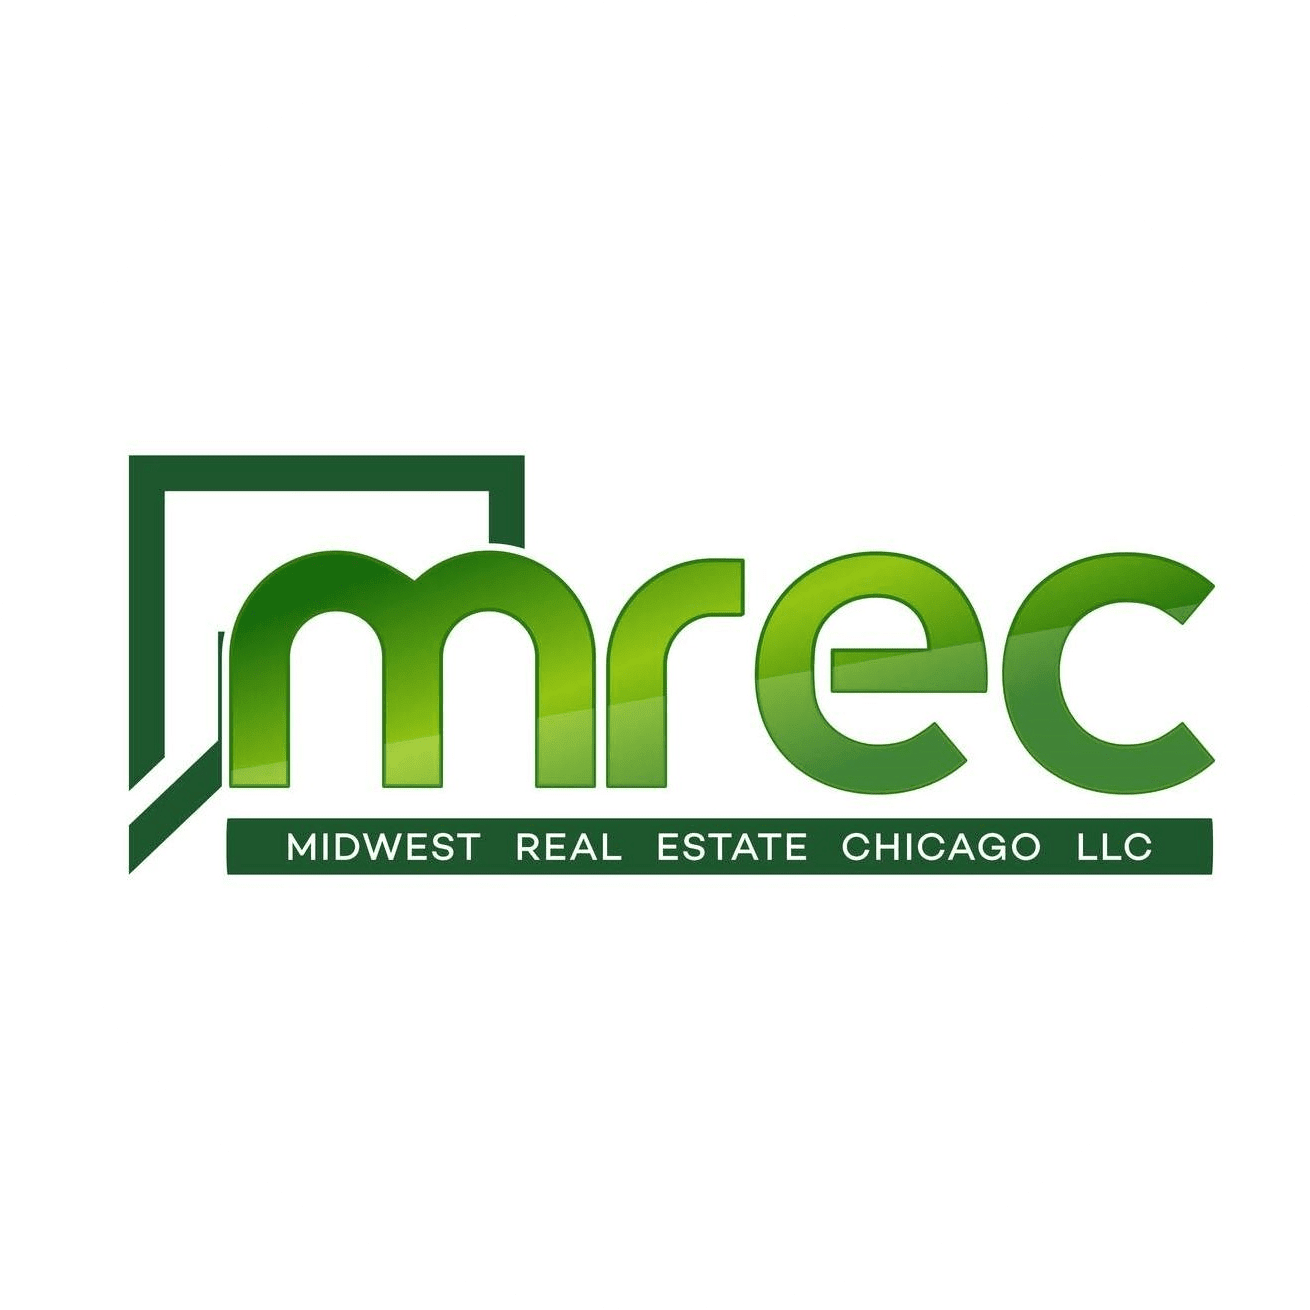 Midwest Real Estate Chicago, LLC